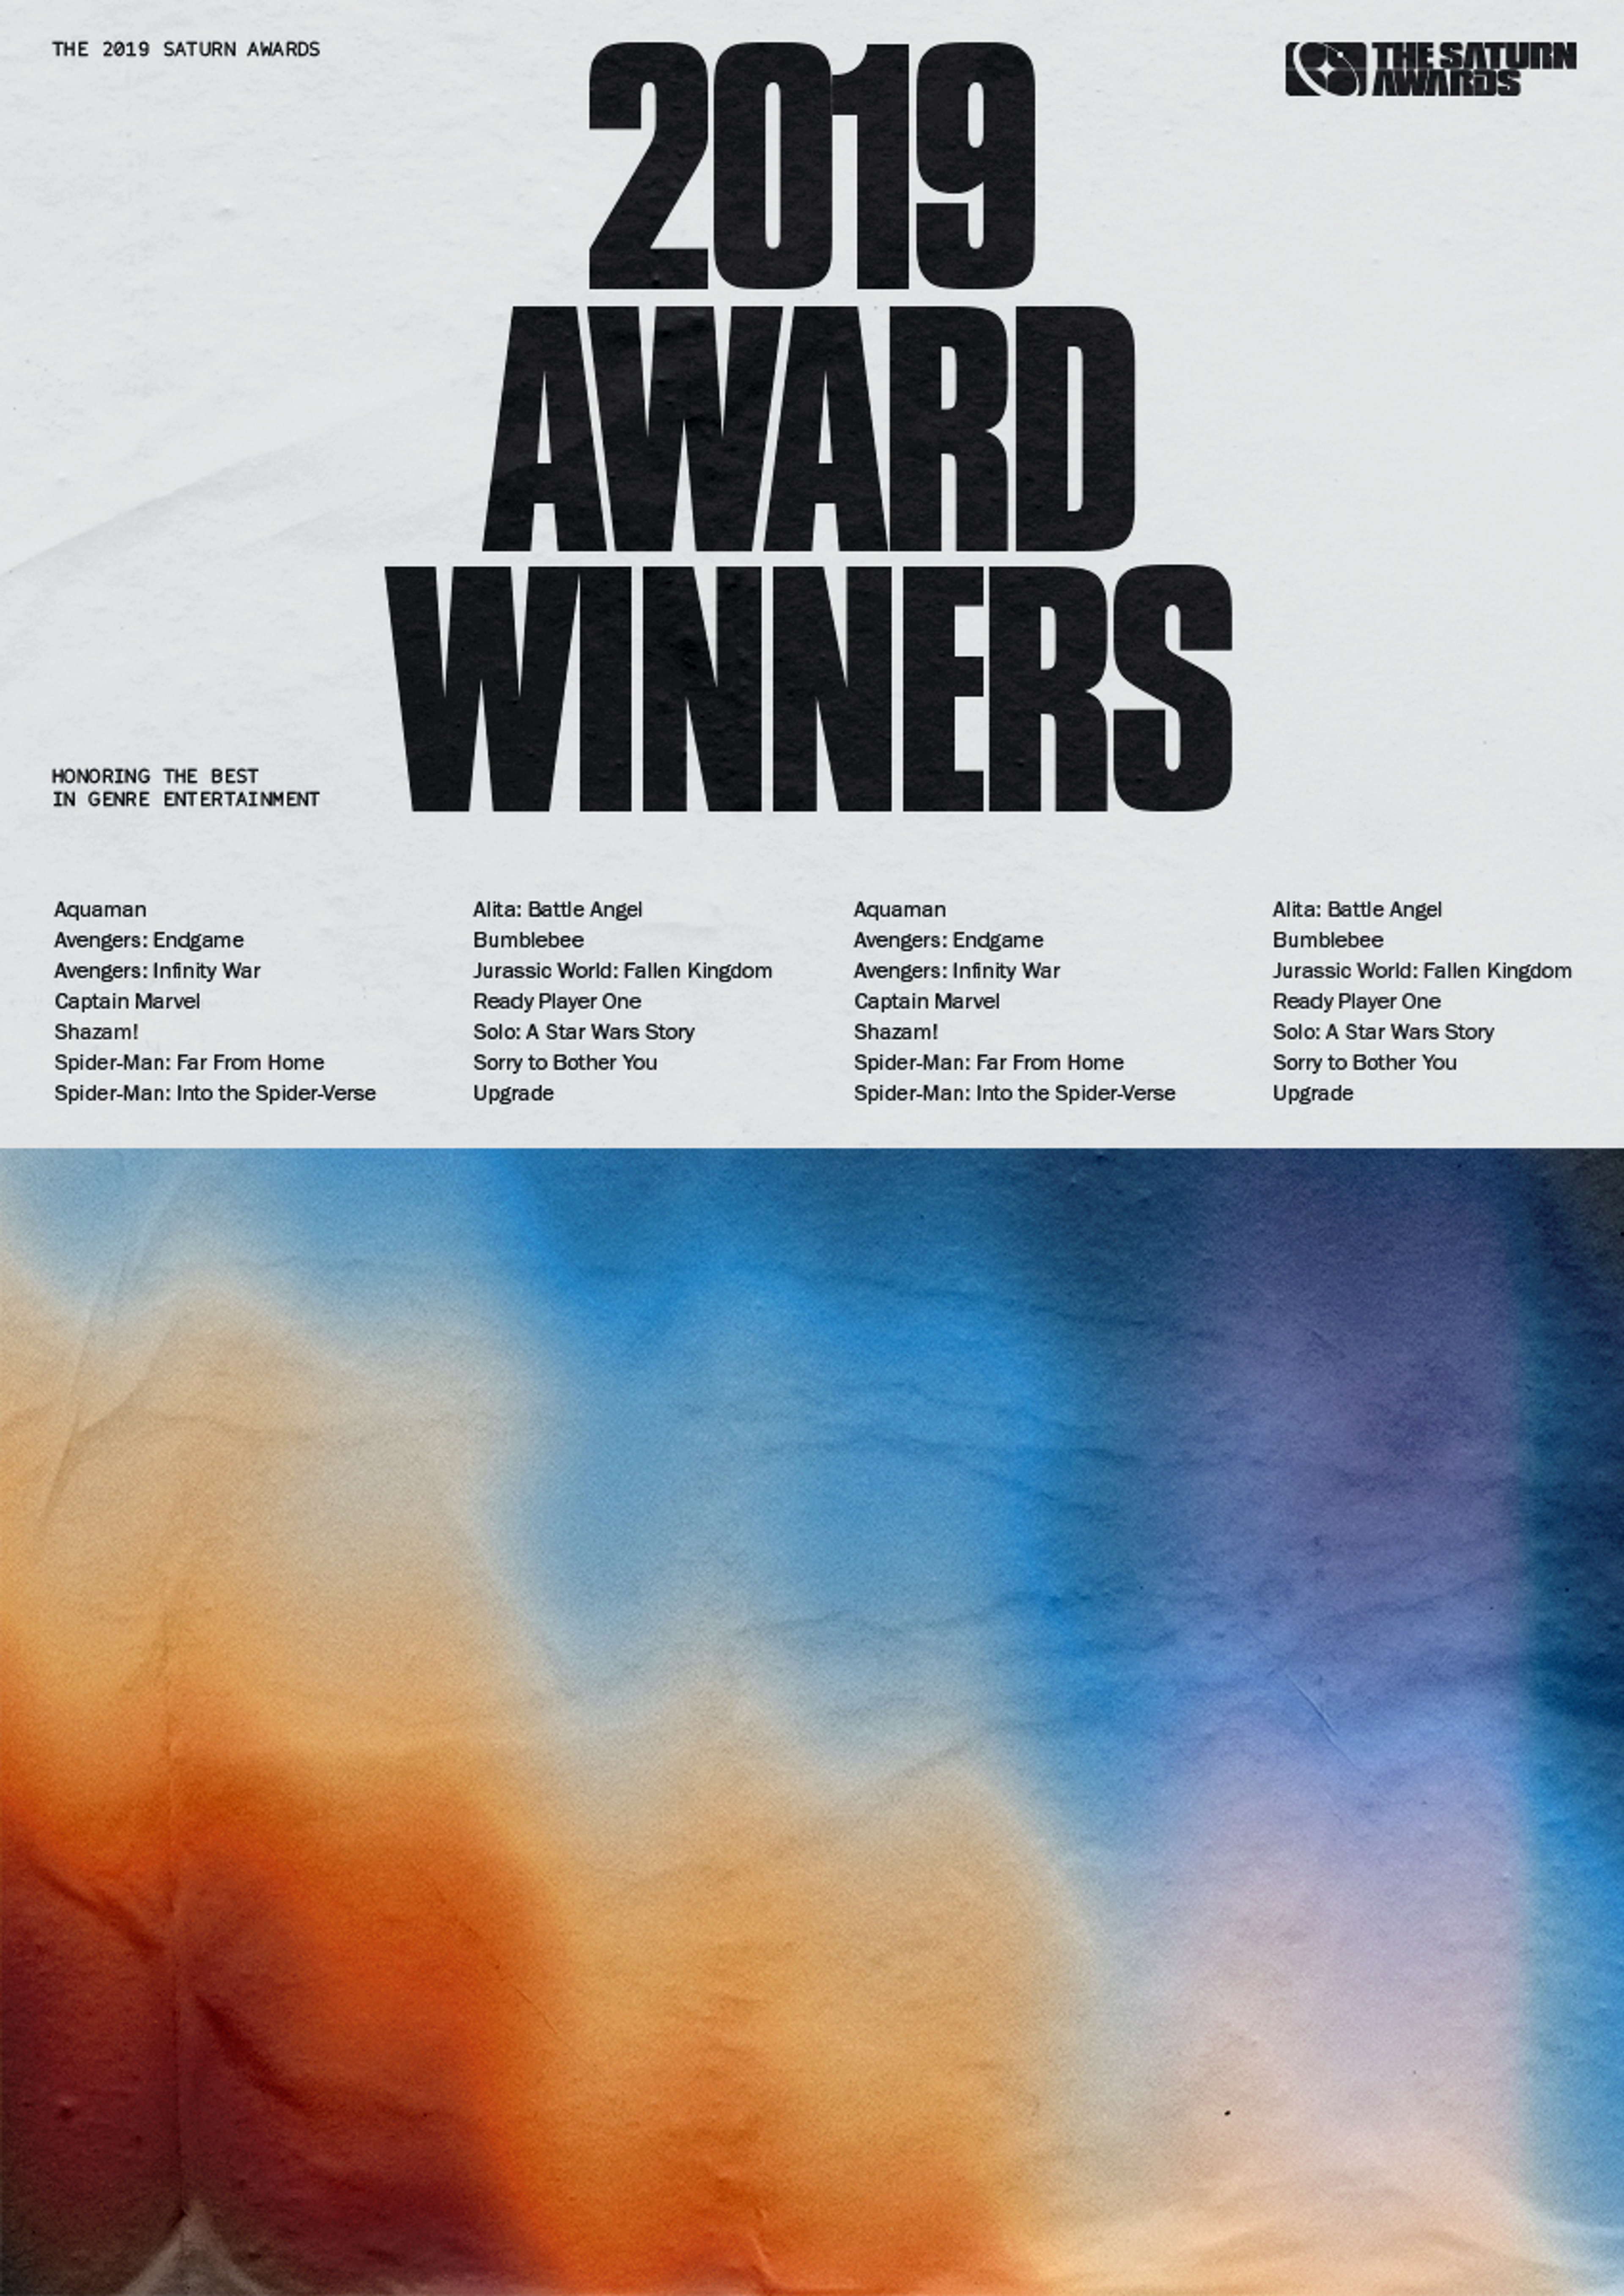 saturn awards poster reading "2019 award winners" and a blue, orange, and yellow gradient